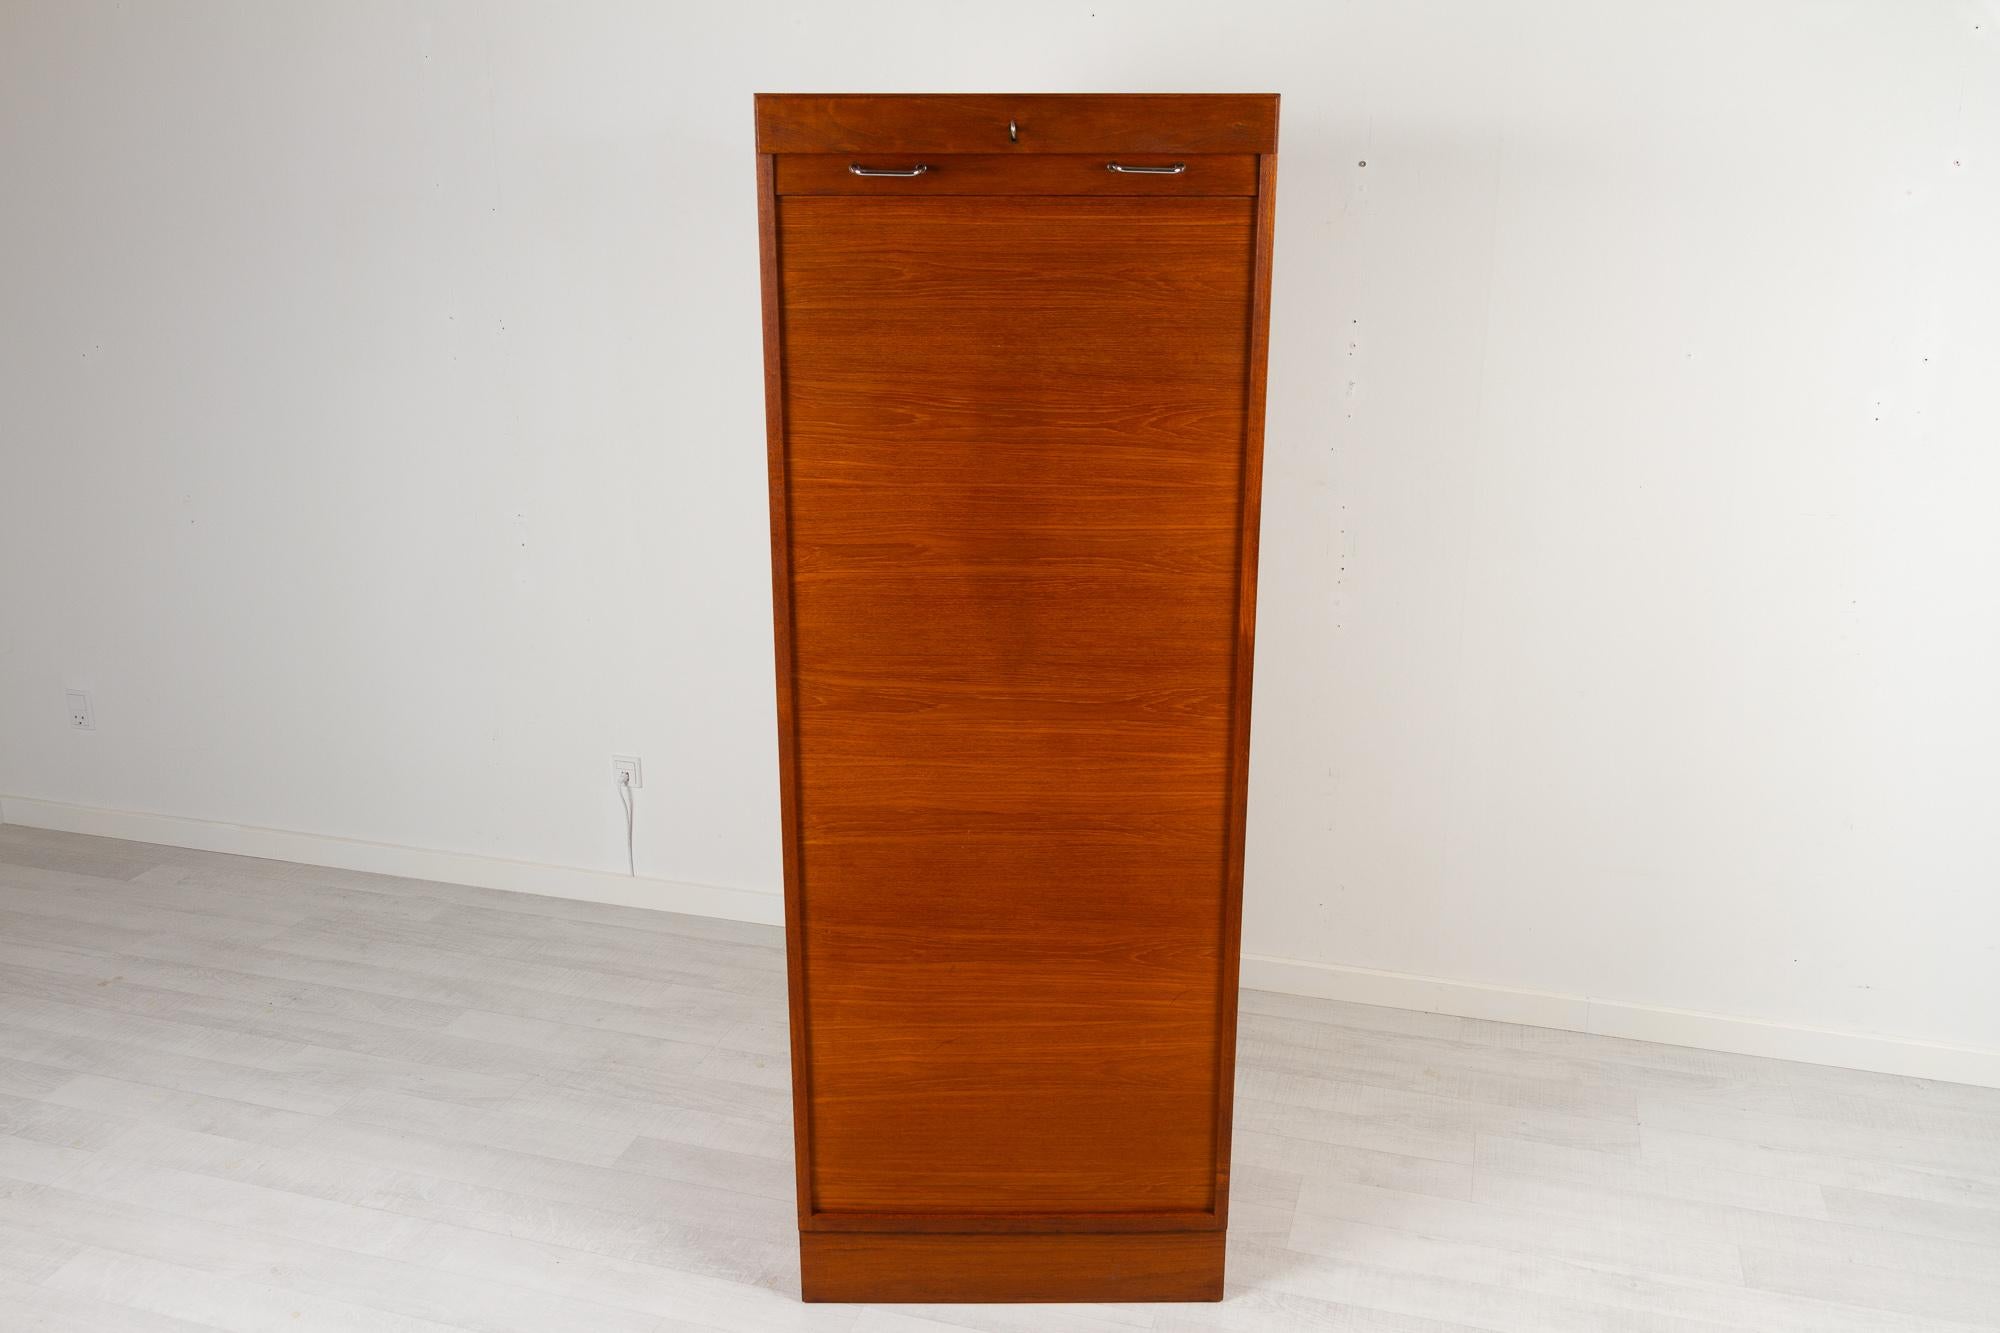 Vintage Danish teak cabinet with tambour front, 1960s
Tall Danish modern filing cabinet with vertical sliding tambour door in teak. 3 wide drawers and 2 shelves. Both shelves and drawers can be placed as desired. Rolling door opens with key. Key is